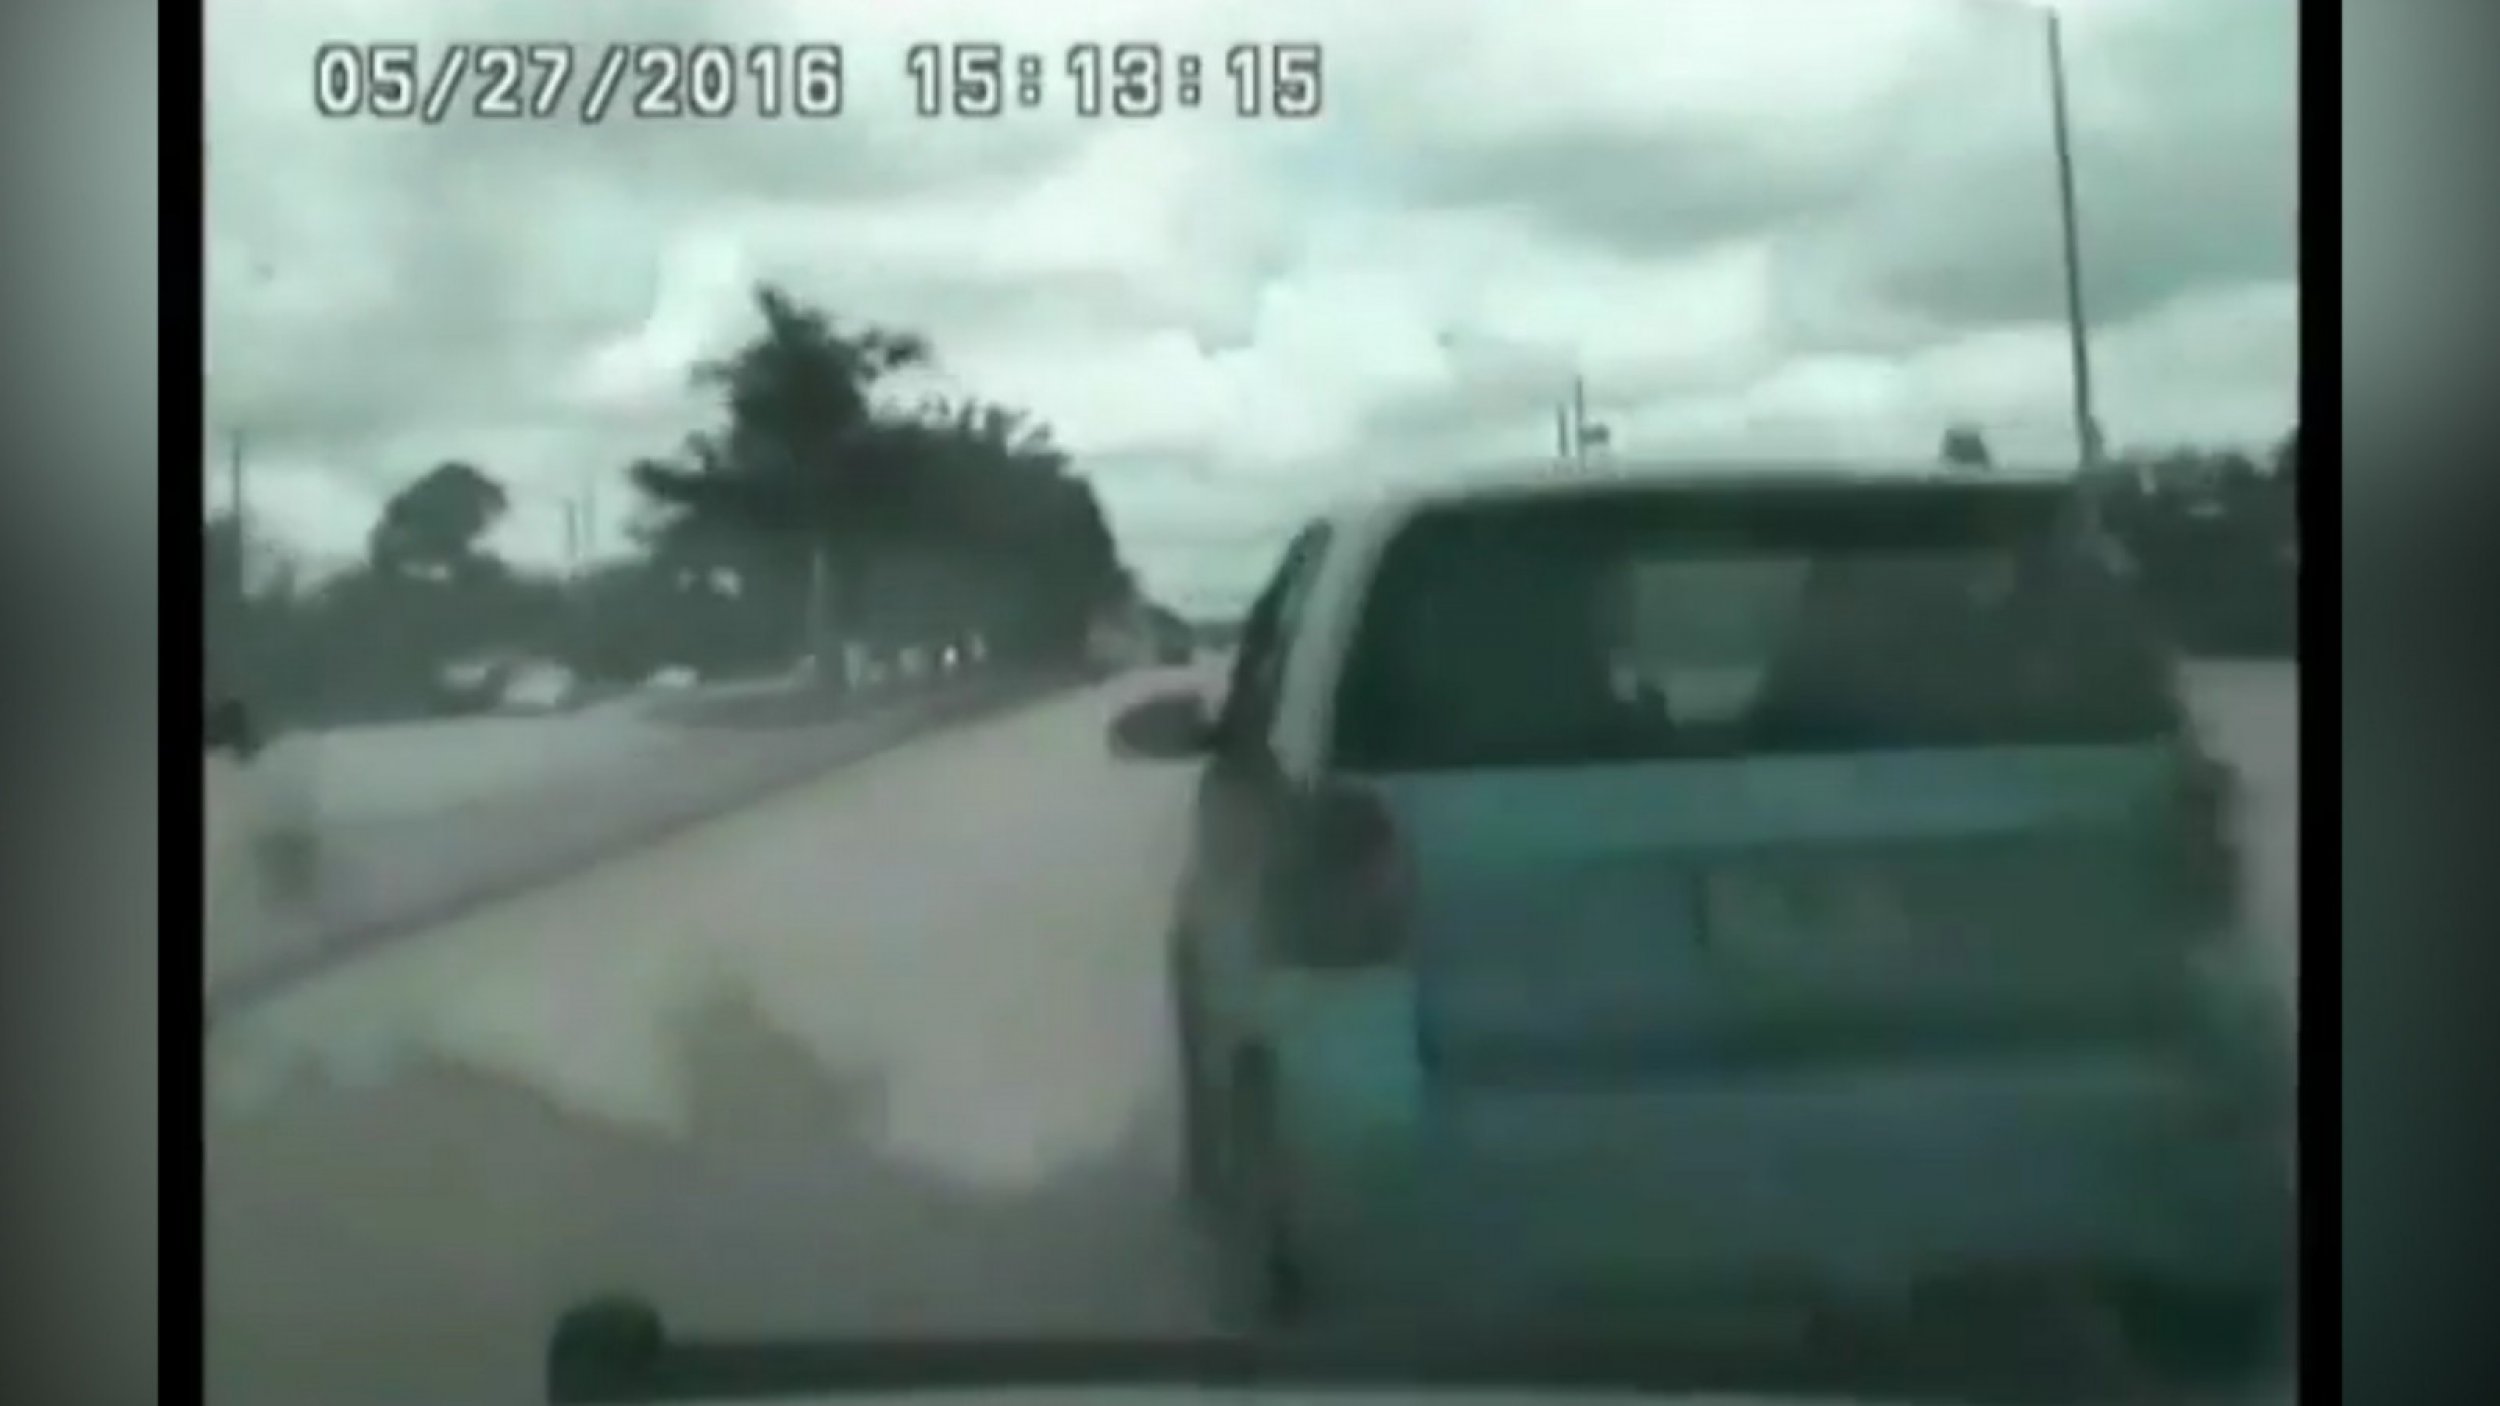 Shocking Footage Captures Moment Speeding Police Officer Plows Into Car At 104mph